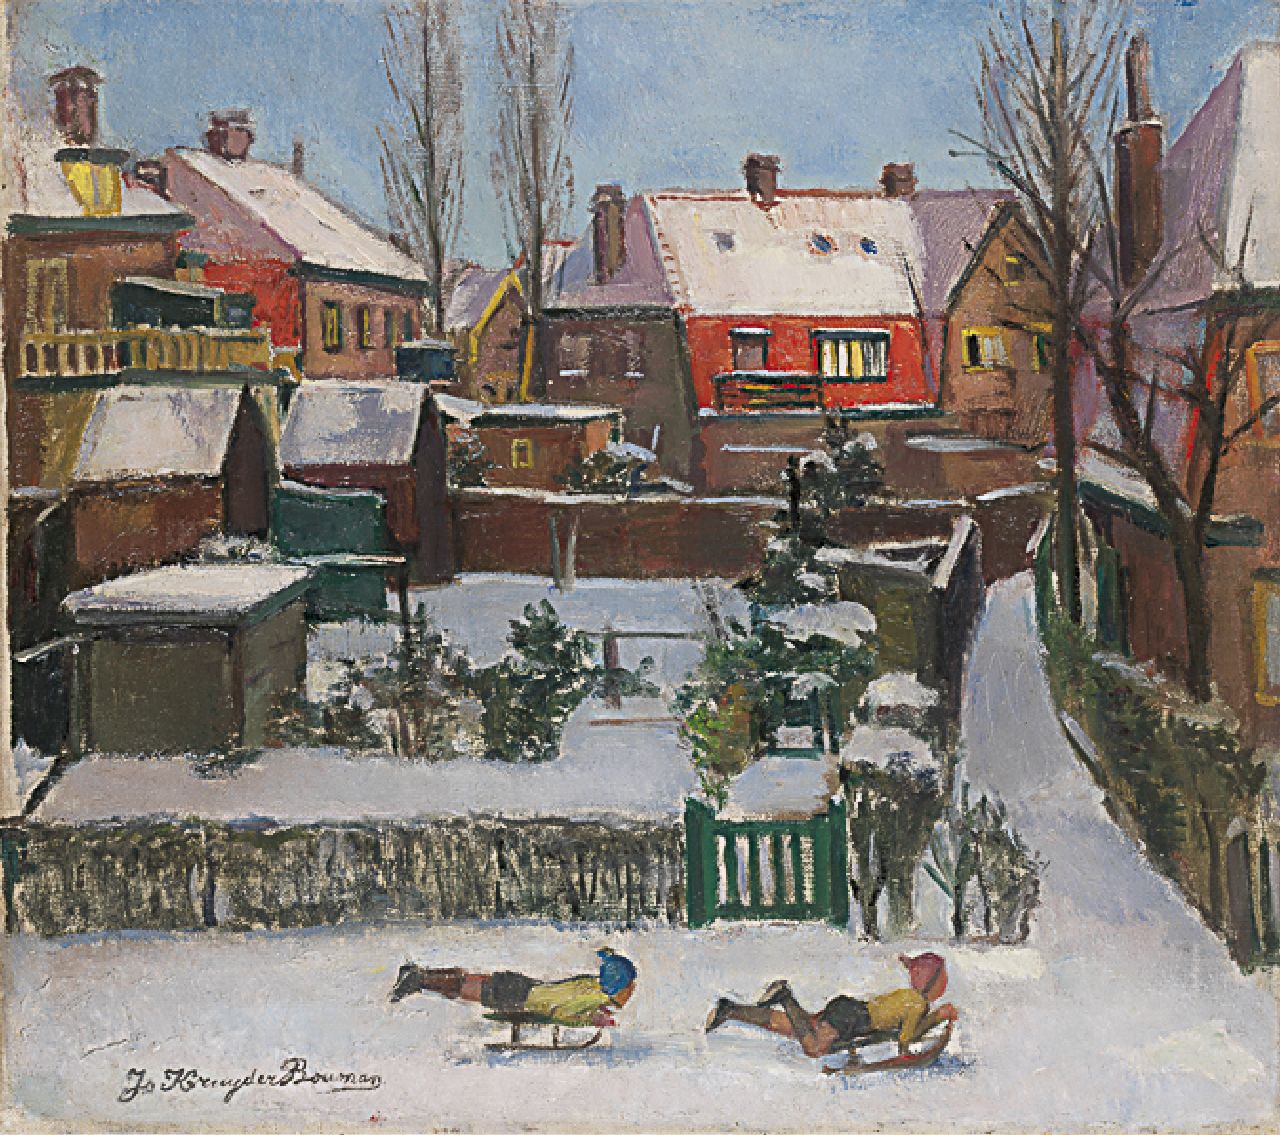 Jo Kruyder-Bouman | Sledding through town, oil on canvas, 40.3 x 45.0 cm, signed l.l. and dated 1942